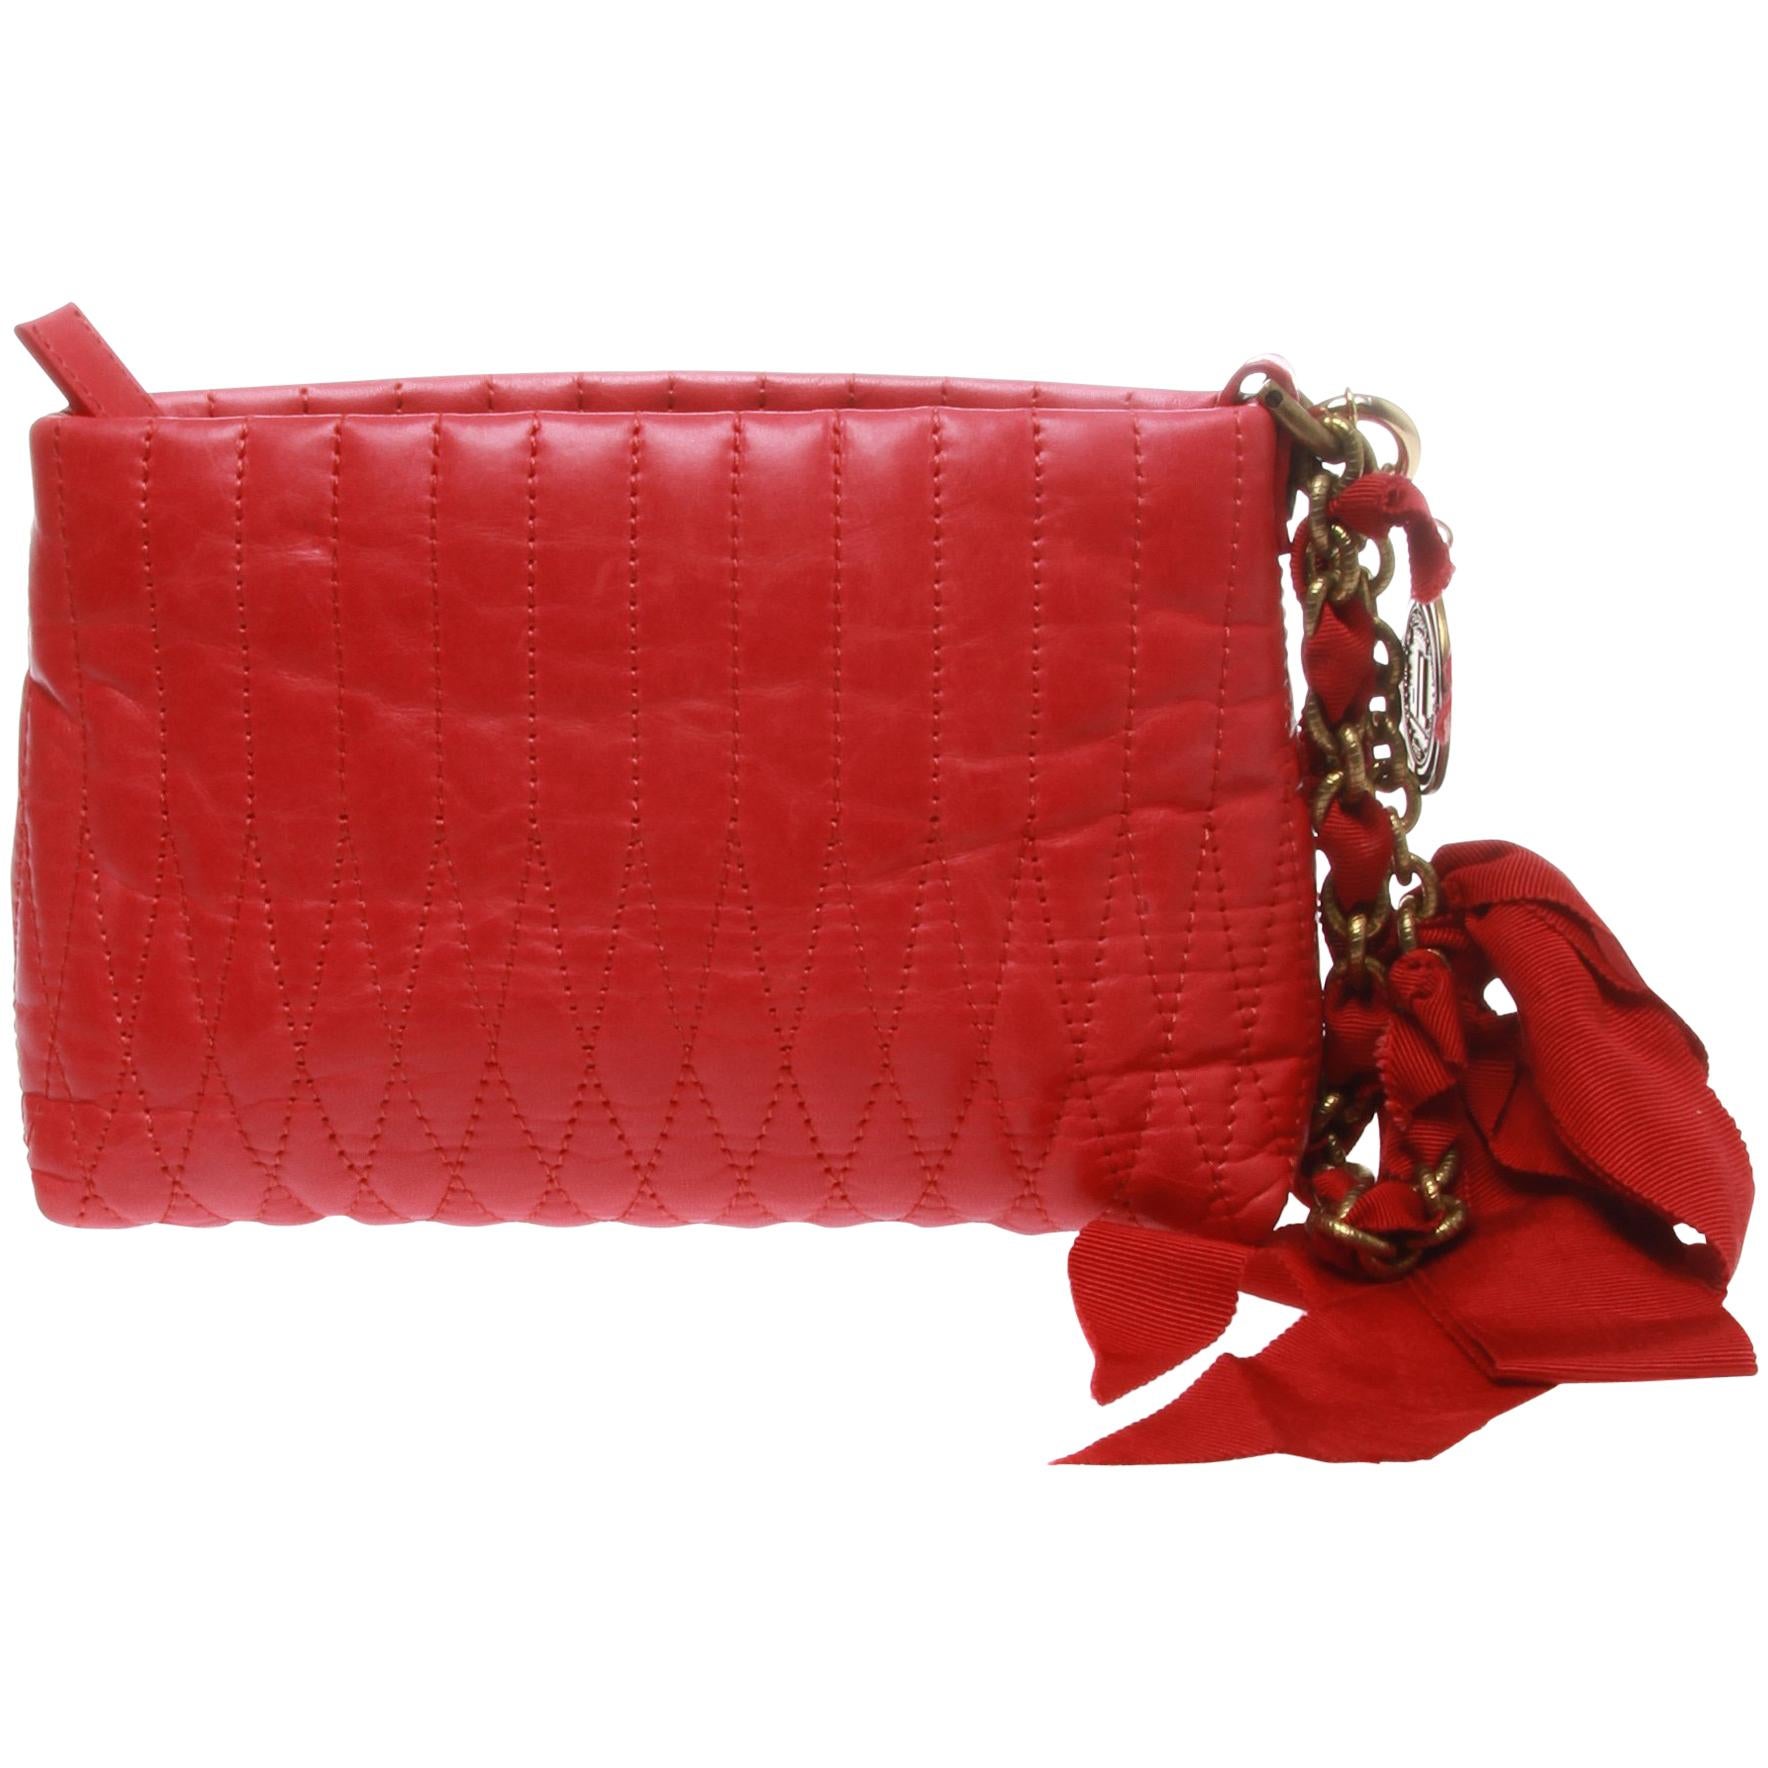 Lanvin red "Mini Happy' Quilted leather clutch